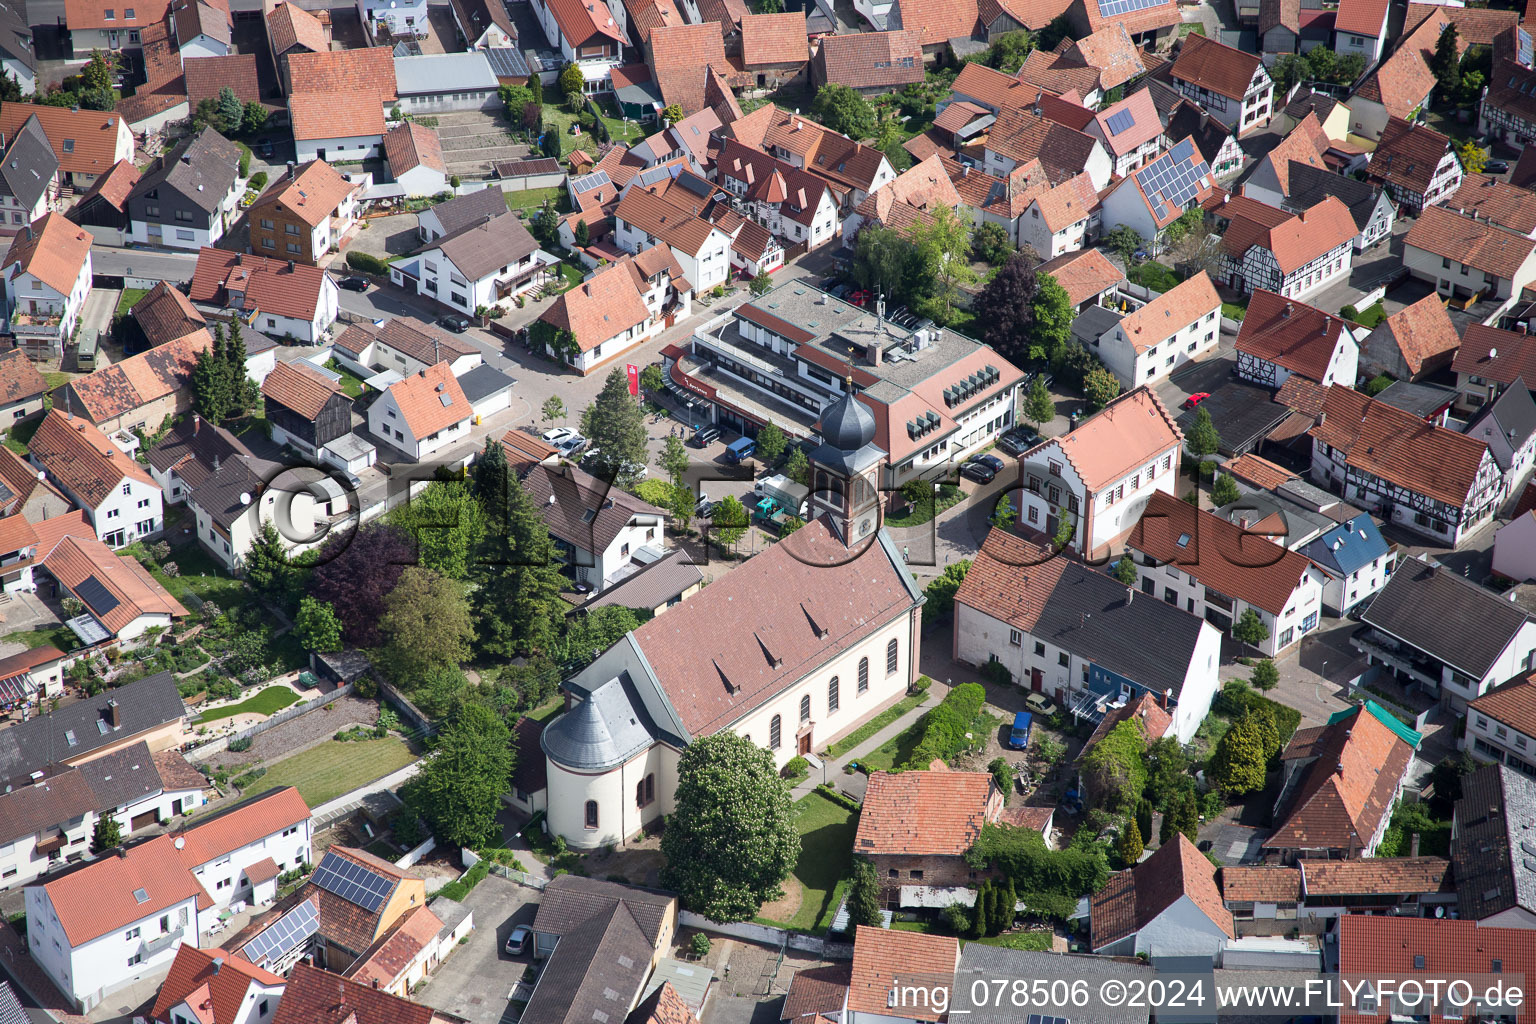 Aerial view of Church building in the village of in Hagenbach in the state Rhineland-Palatinate, Germany